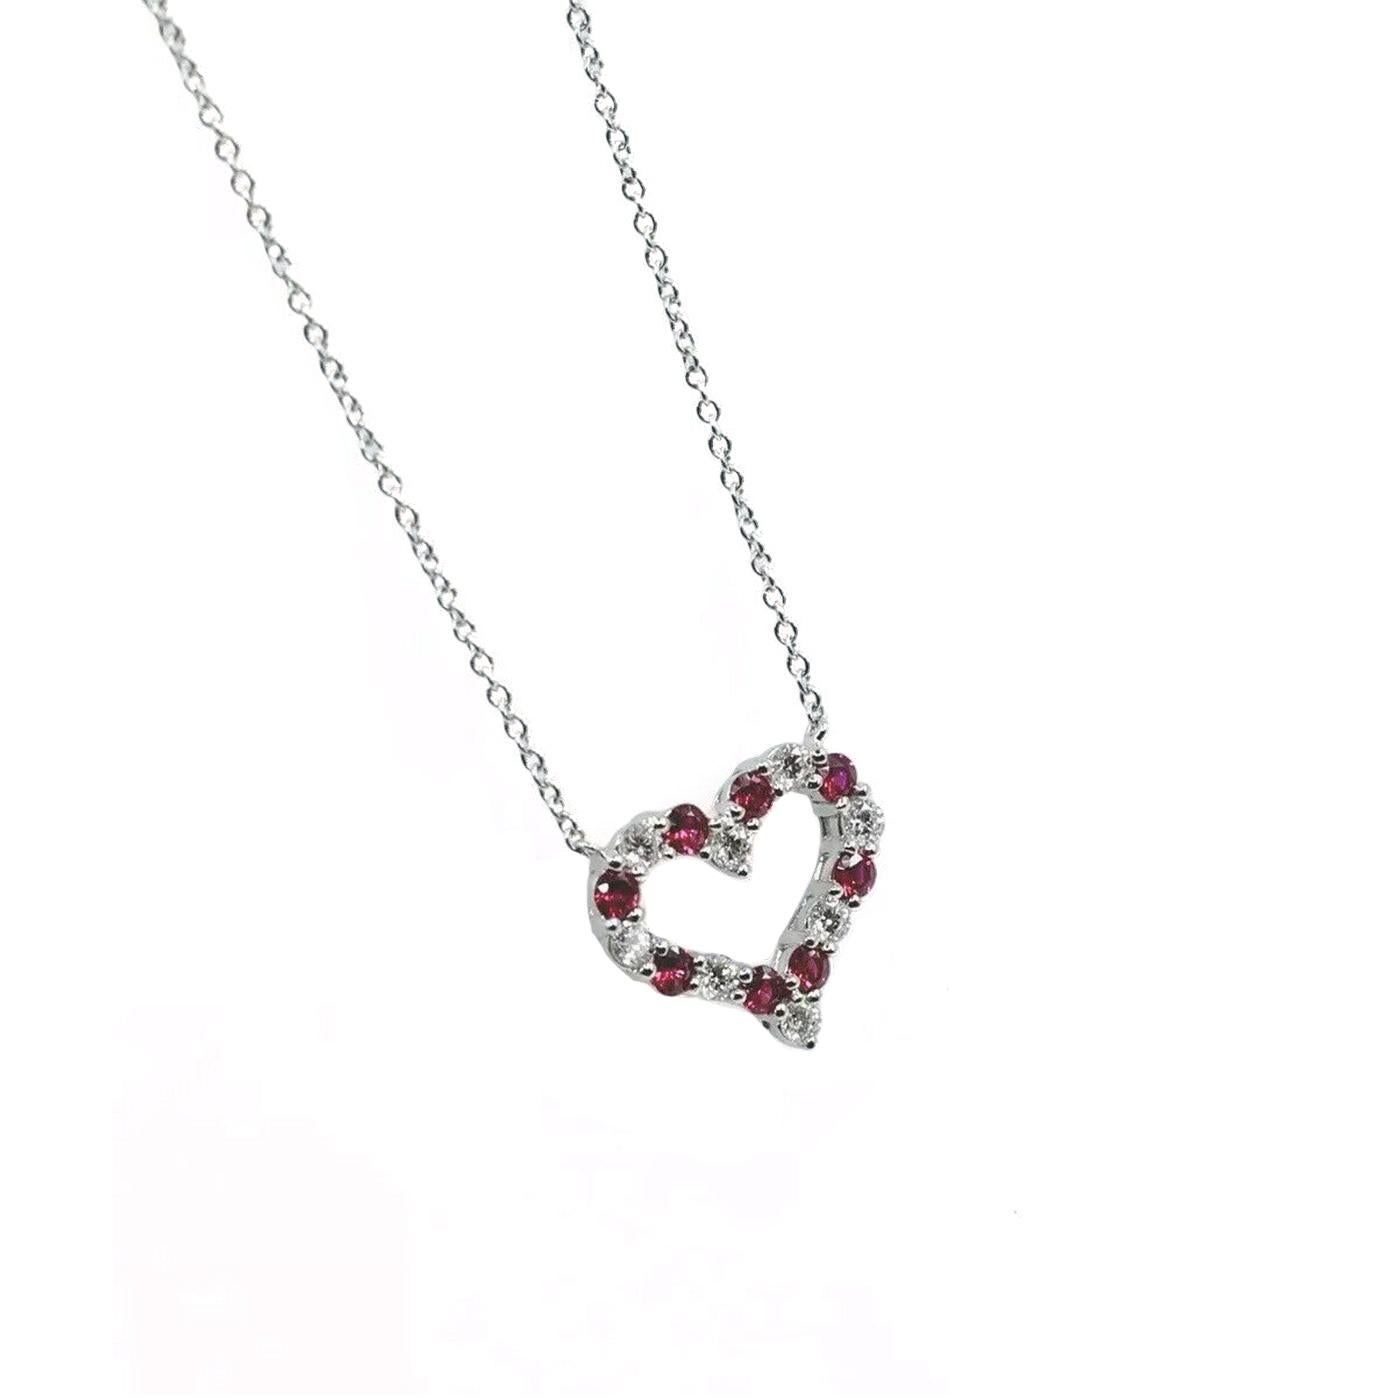 Tiffany gets to the heart of the matter. This Hearts ruby pendant features eight pigeon-blood dark red rubies and eight round brilliant diamonds in platinum. Size small on a 16